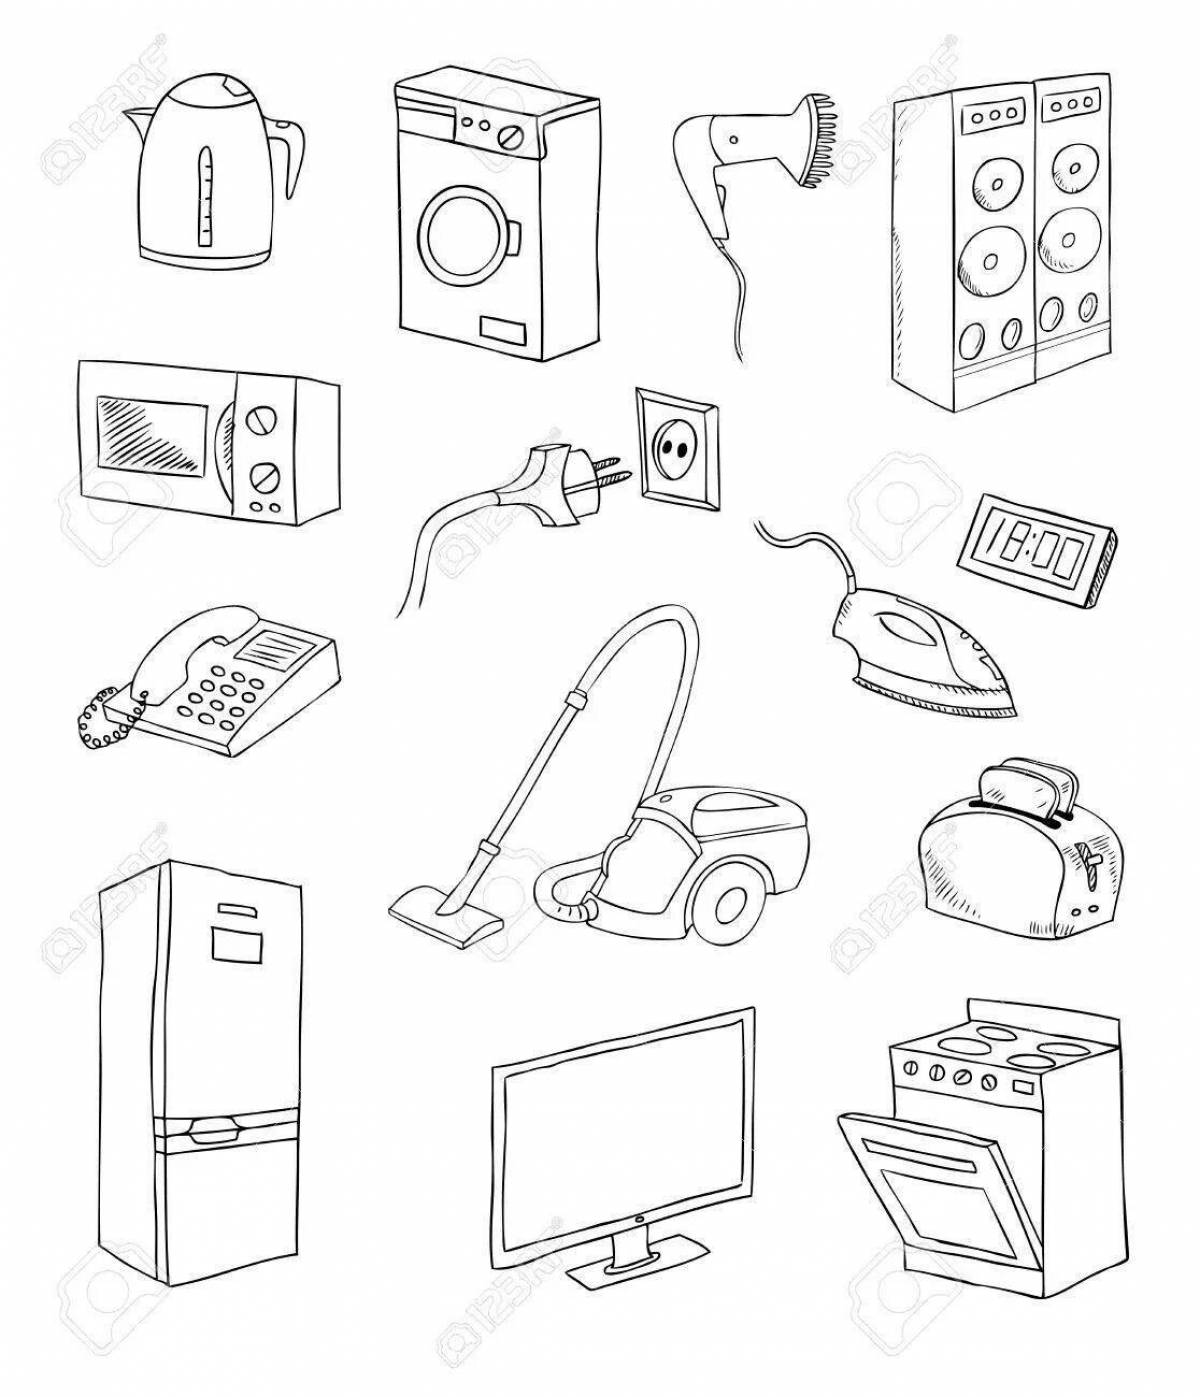 Amusement coloring book of electrical appliances for children